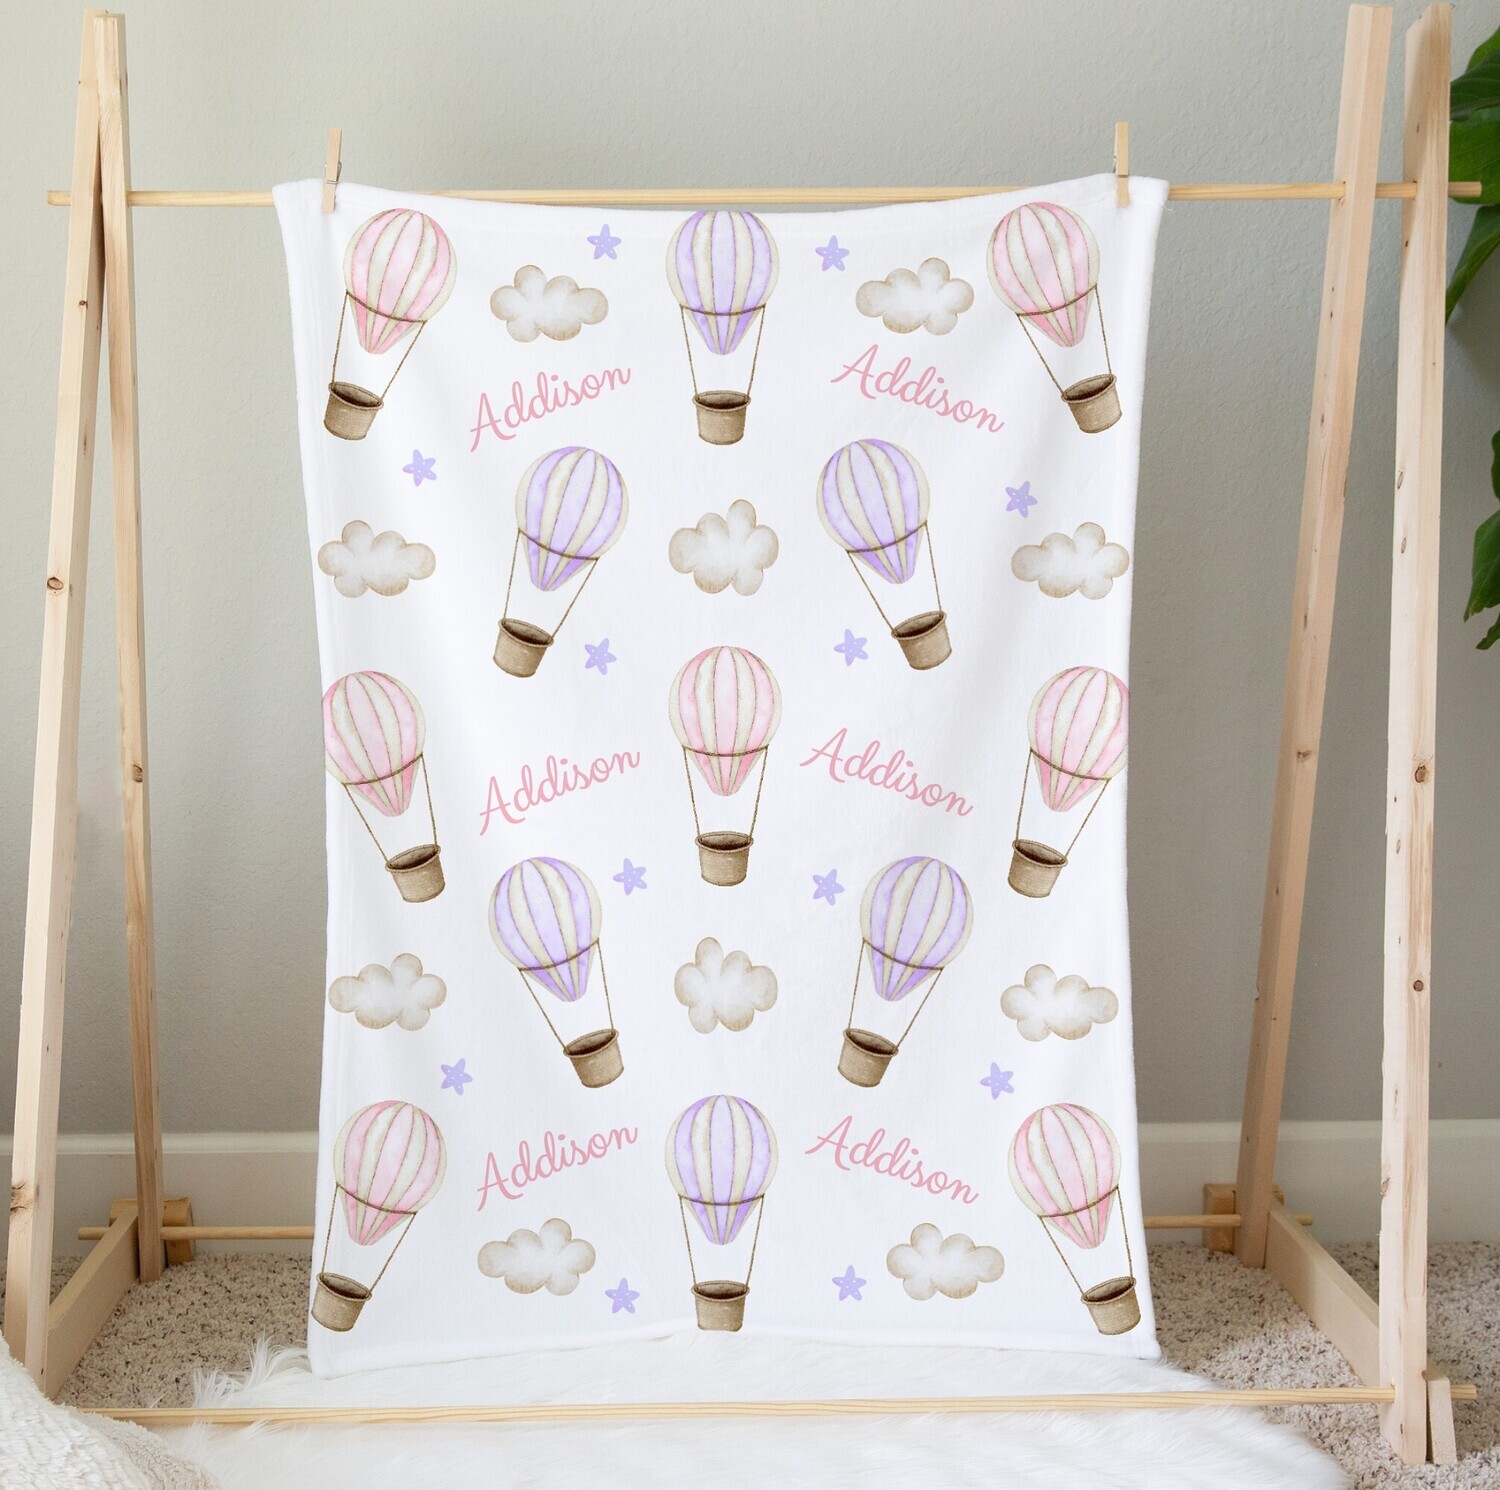 Personalized Baby Girl Blanket Pink Purple Hot Air Balloons Custom Name Blanket Shower Gift Custom Name Blanket Girl Bedroom Nursery Throw Tummy Time